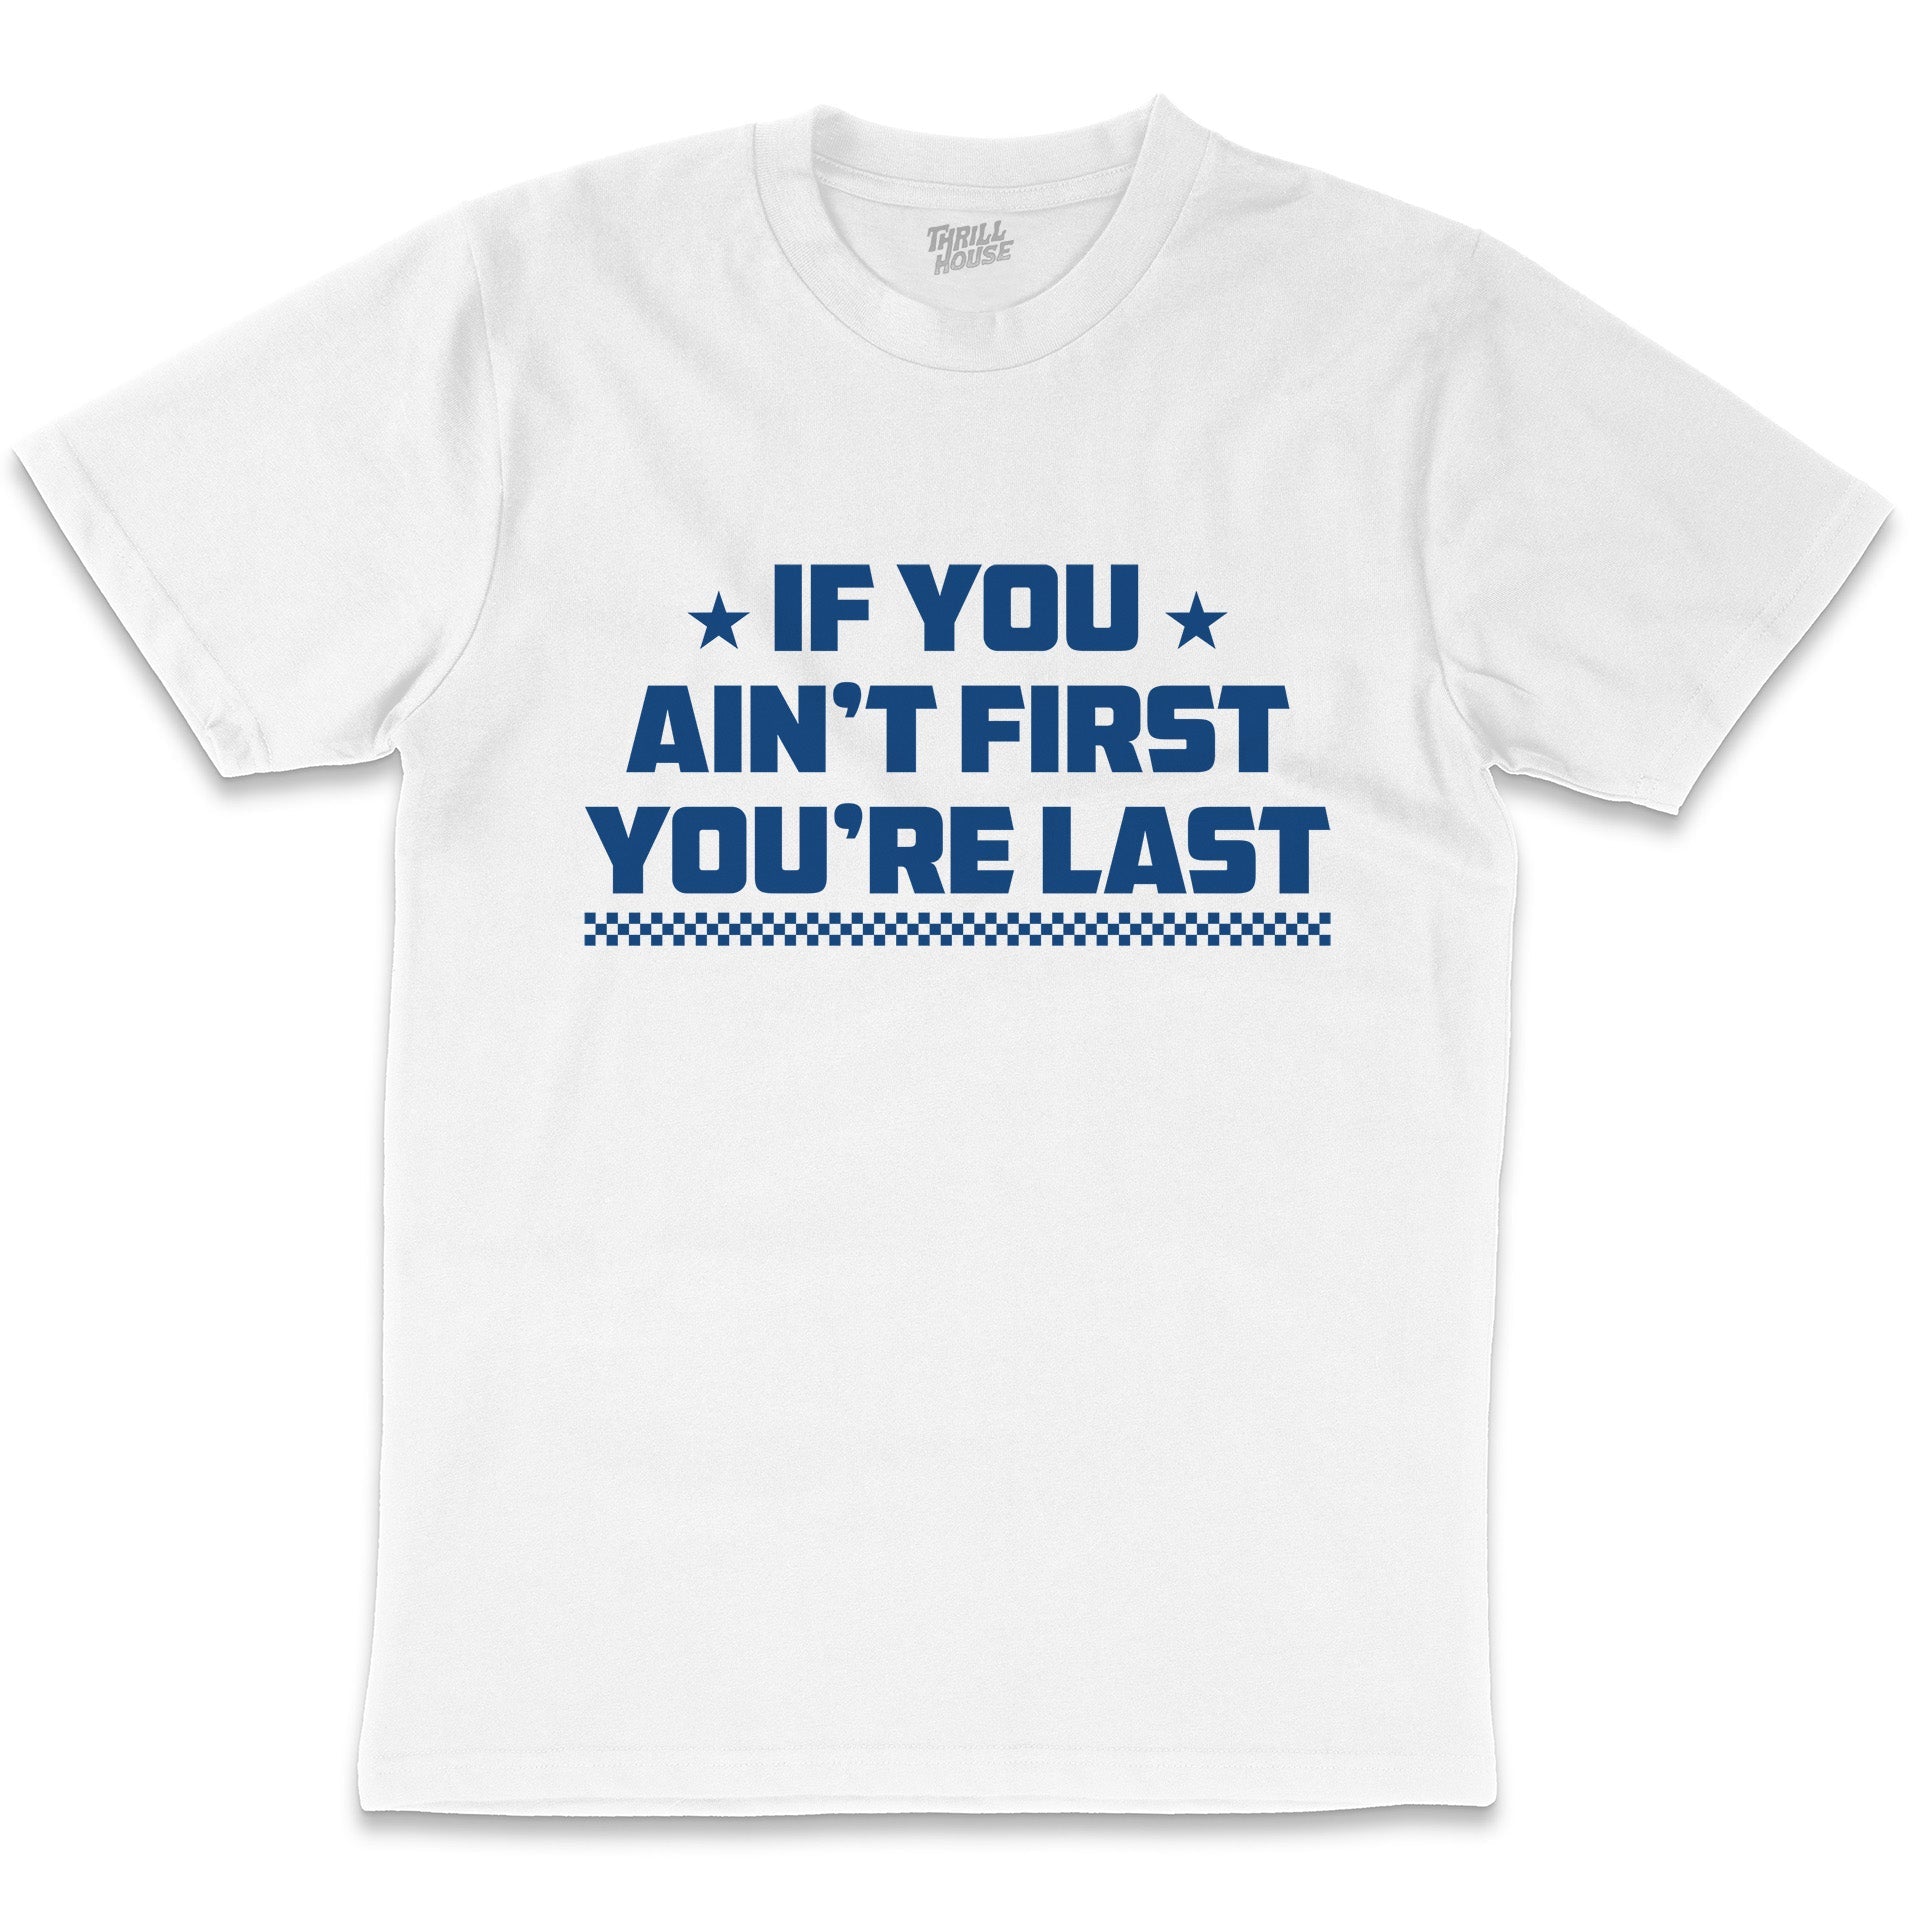 If You Ain't First You're Last Funny Sports Competitive Slogan Cotton T-Shirt